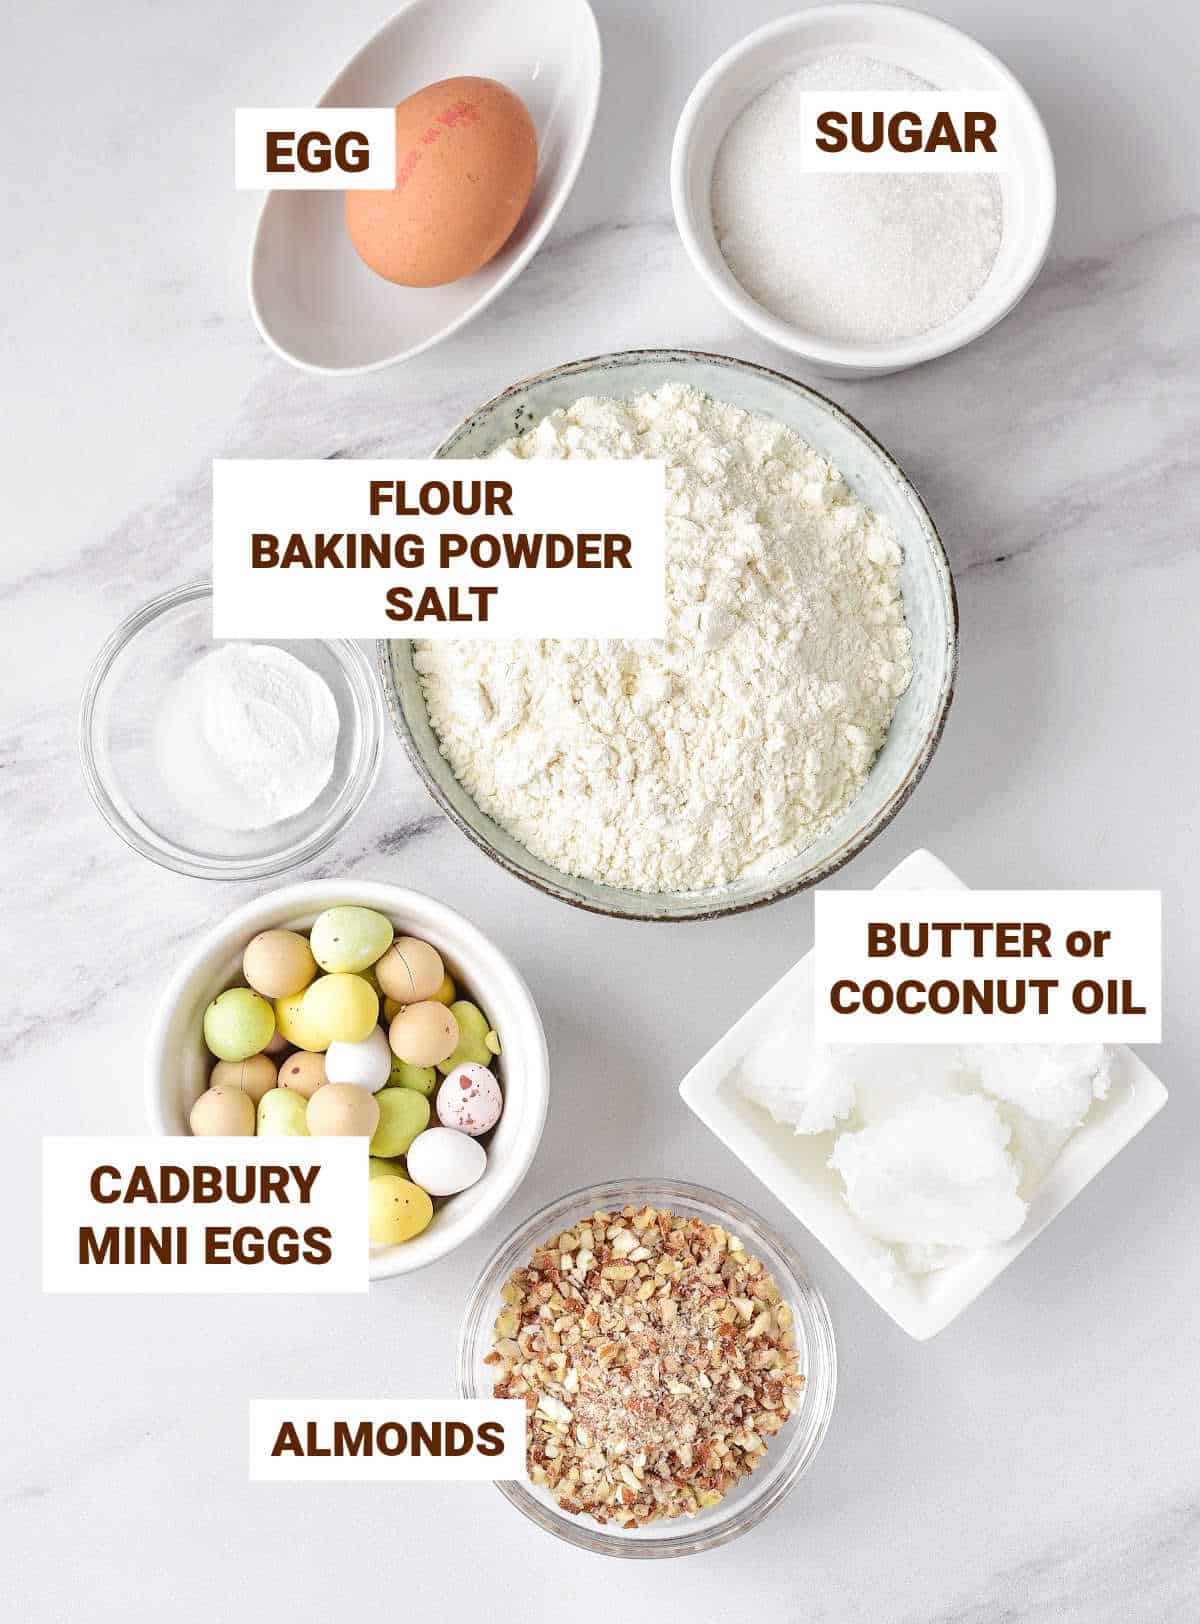 White marble with bowls containing ingredients for Cadbury egg cookies including coconut oil, almonds, flour mixture, egg, sugar.